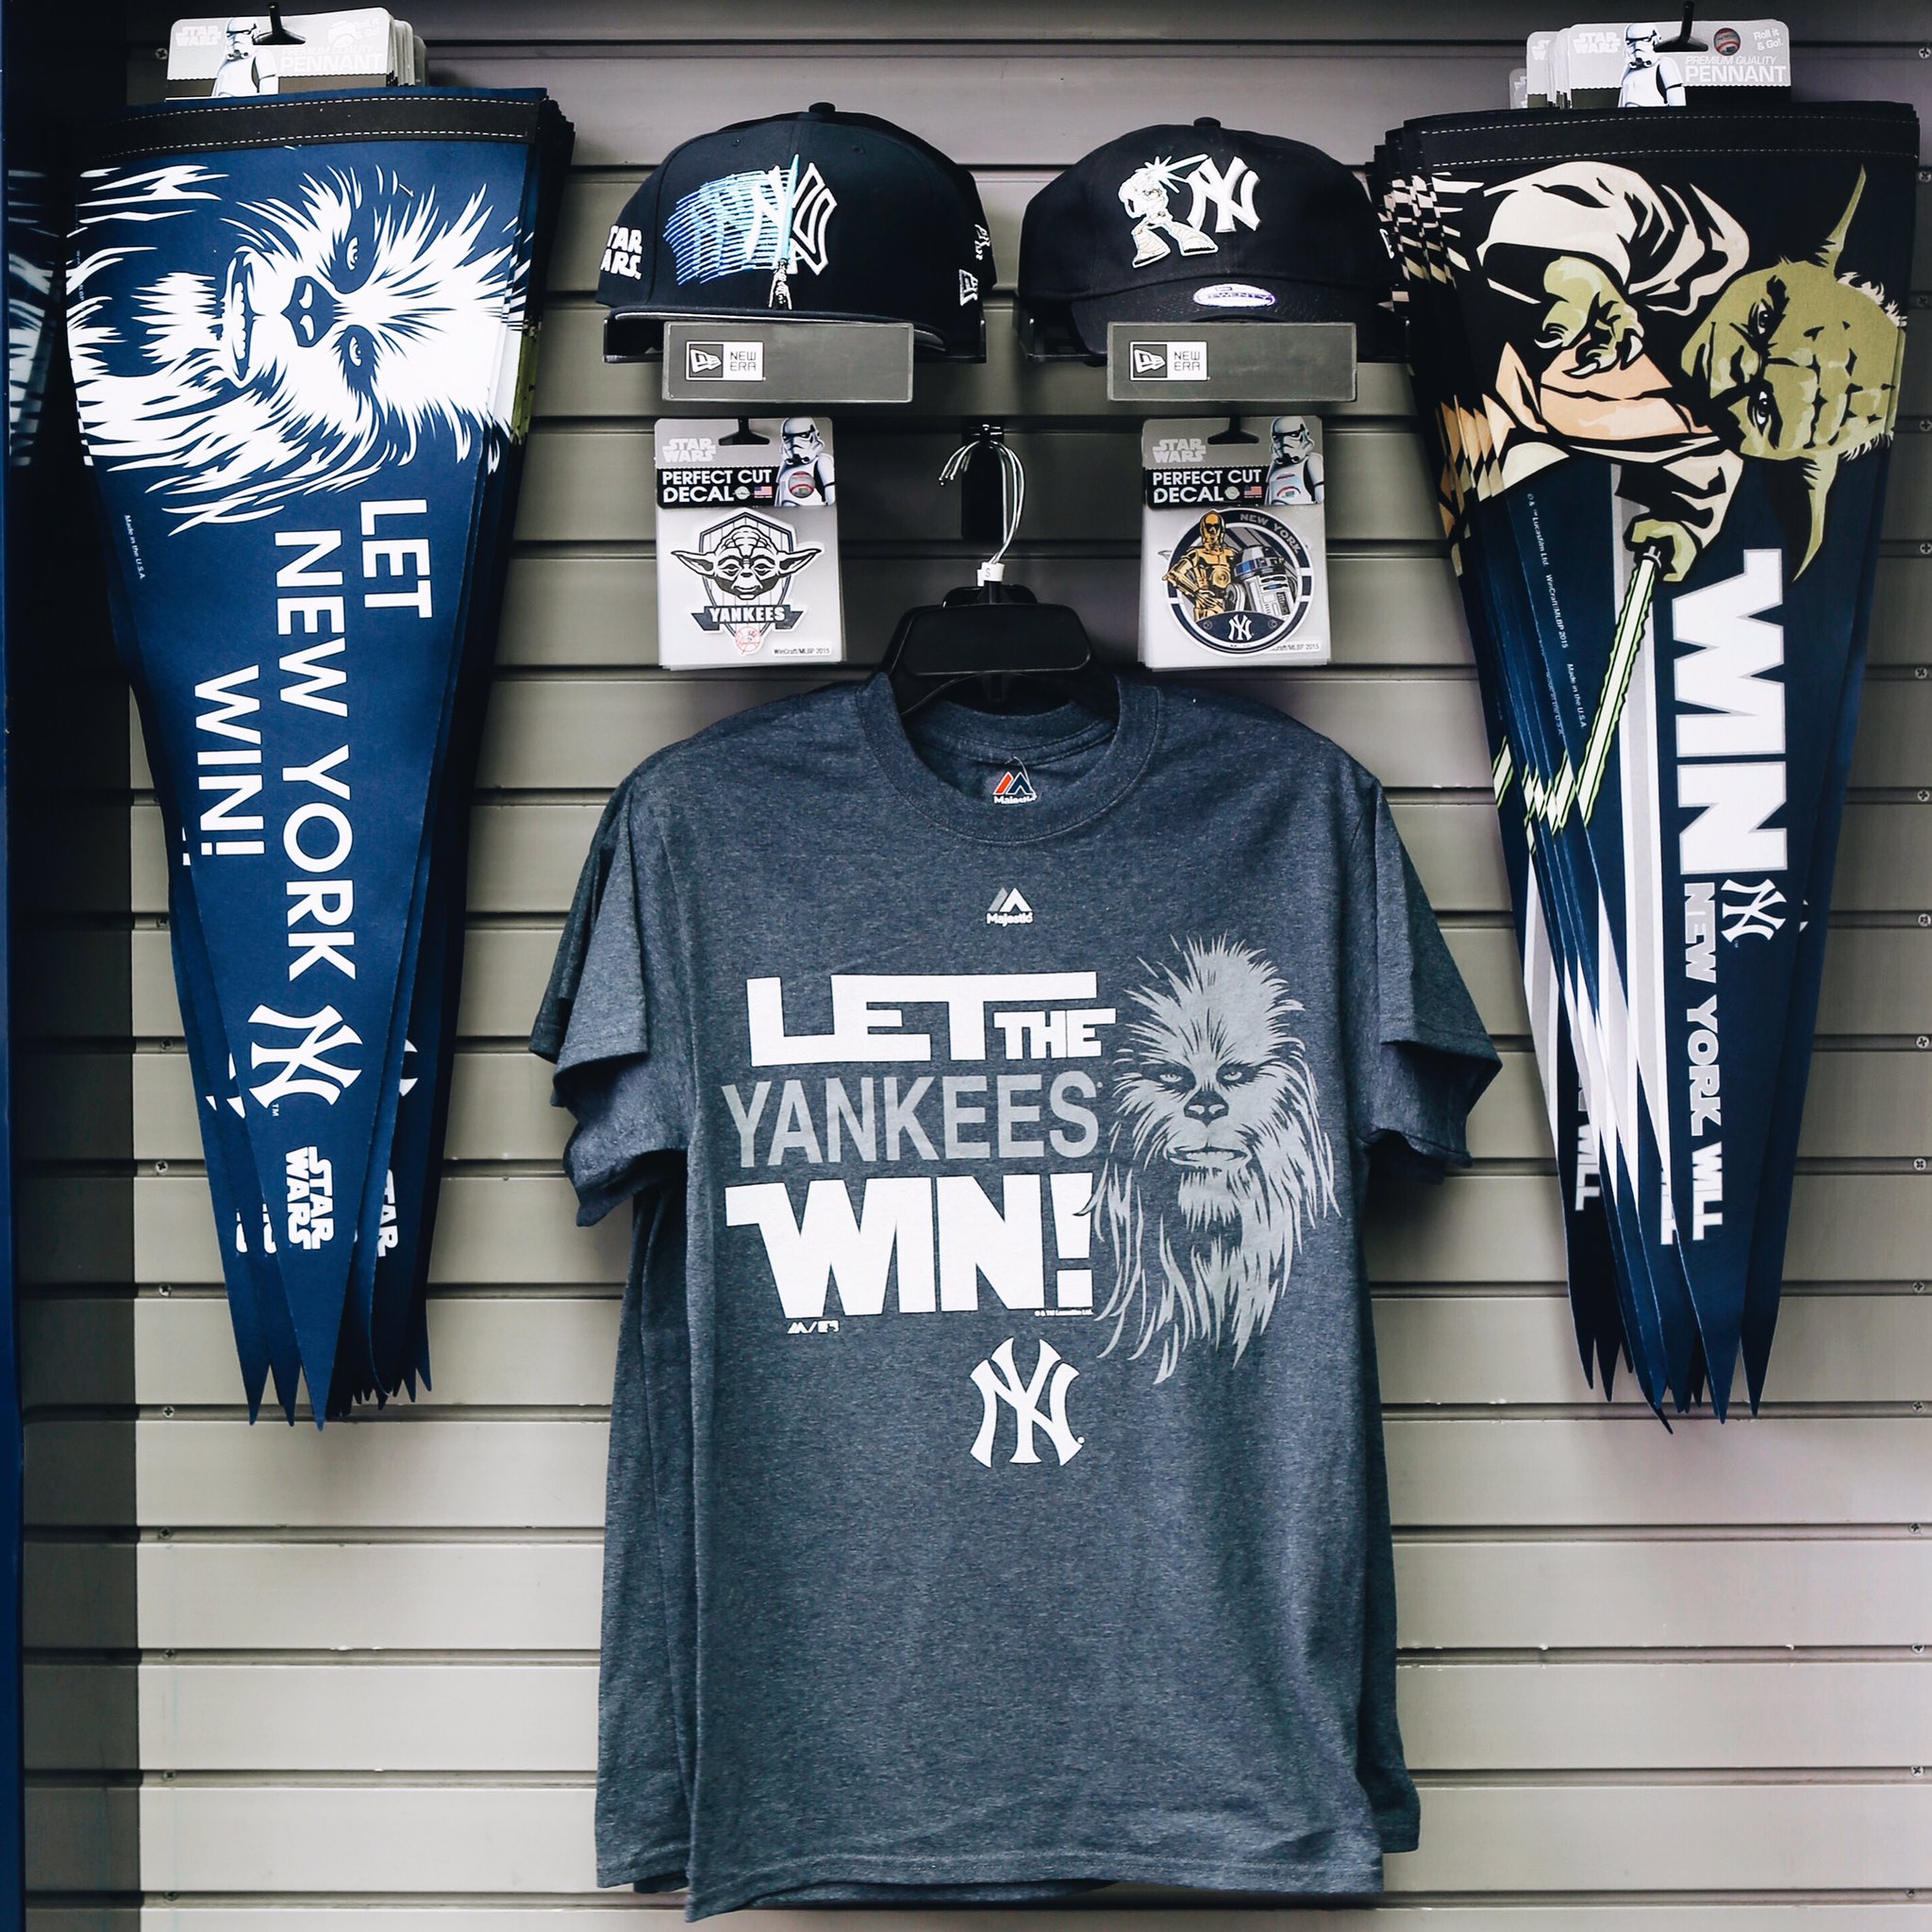 New York Yankees on Twitter: @_SalinaTheGreat yes! Head to our